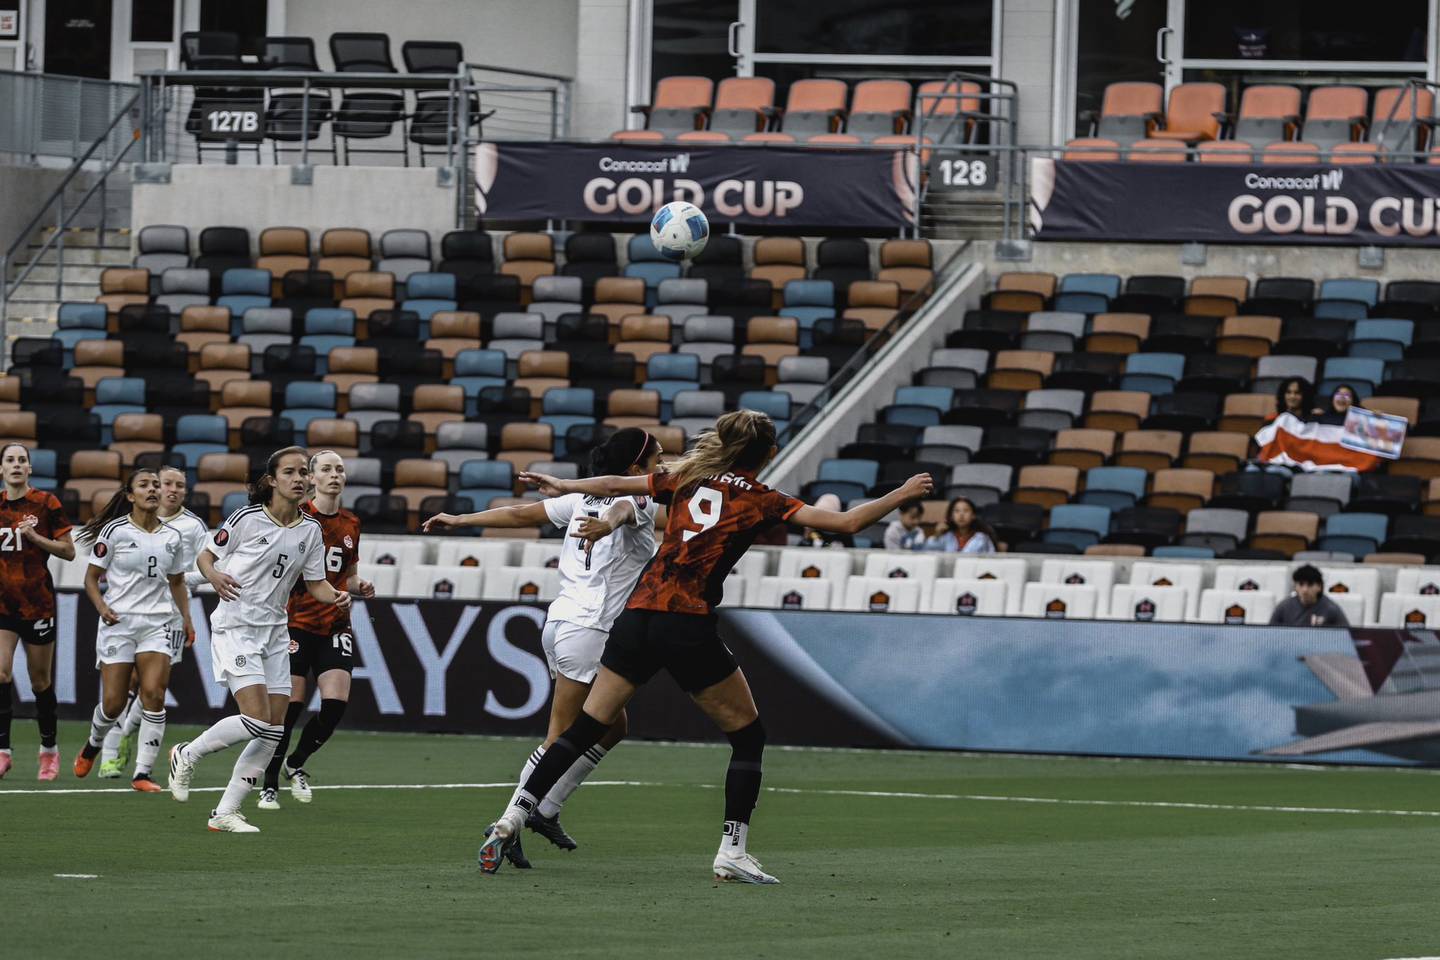 A tough setback against Canada left the Sealy Women in intensive care at the Gold Cup